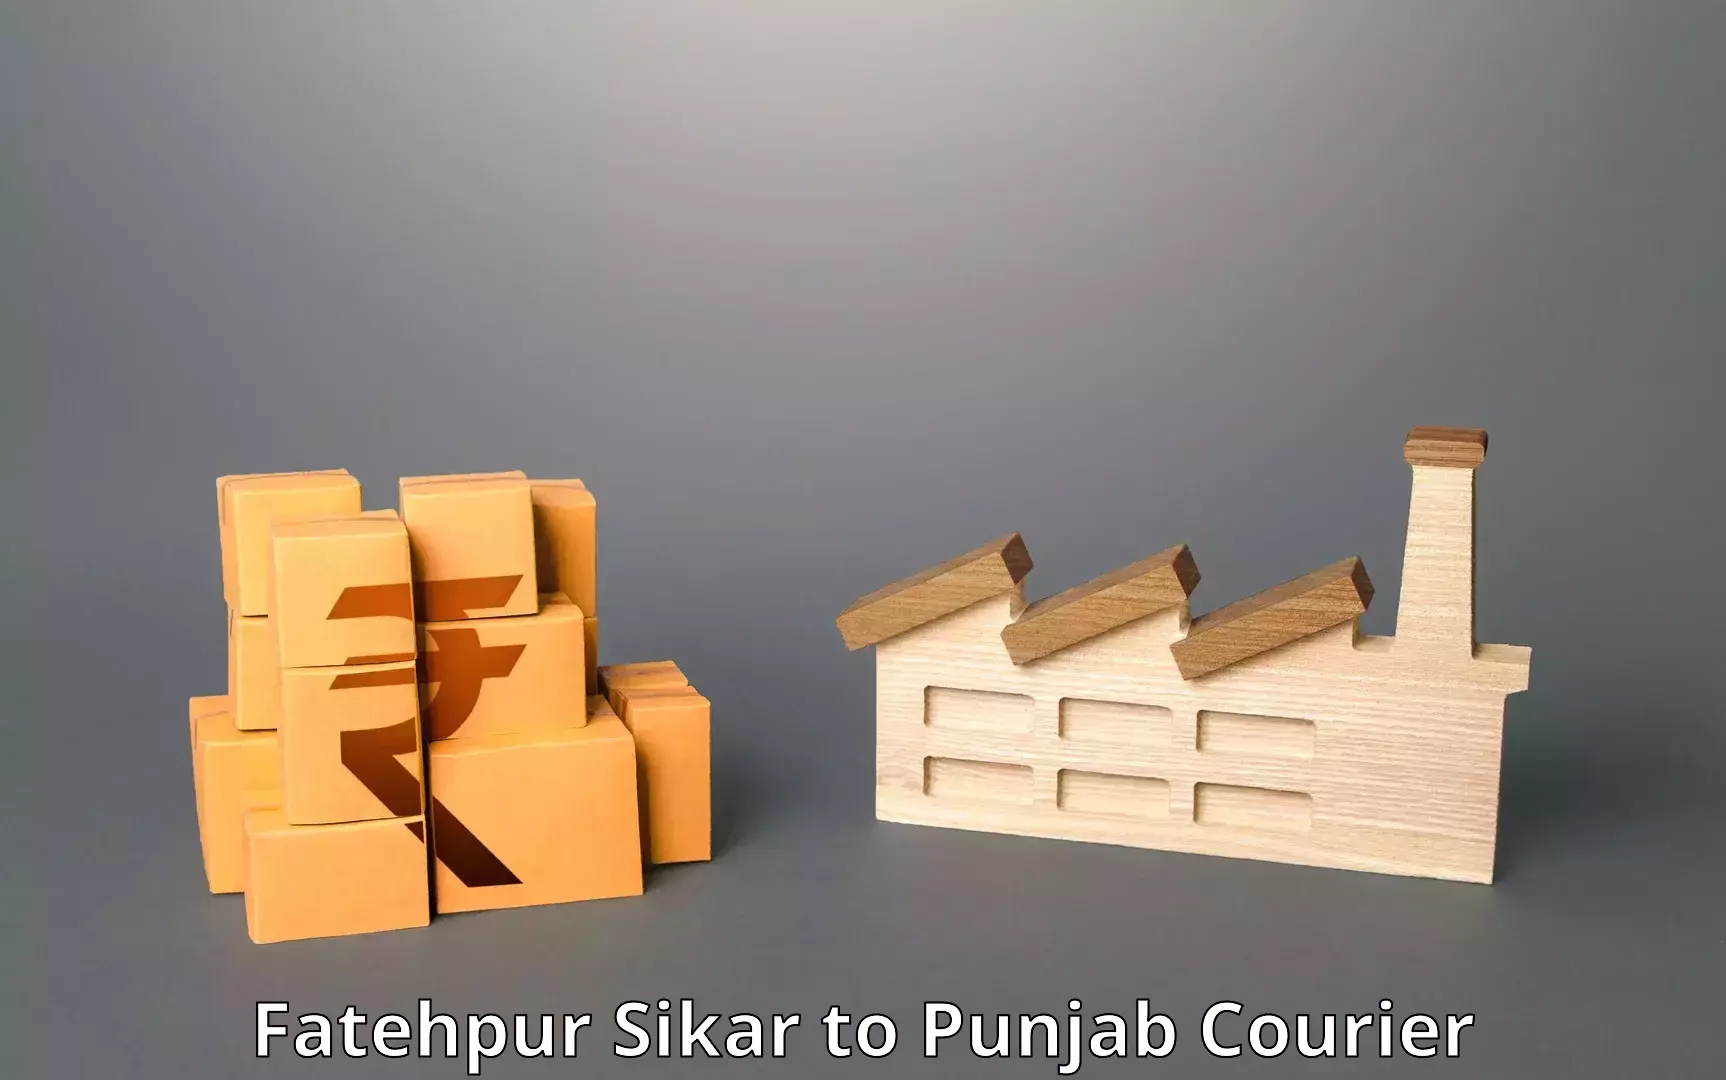 Next-generation courier services Fatehpur Sikar to Talwara